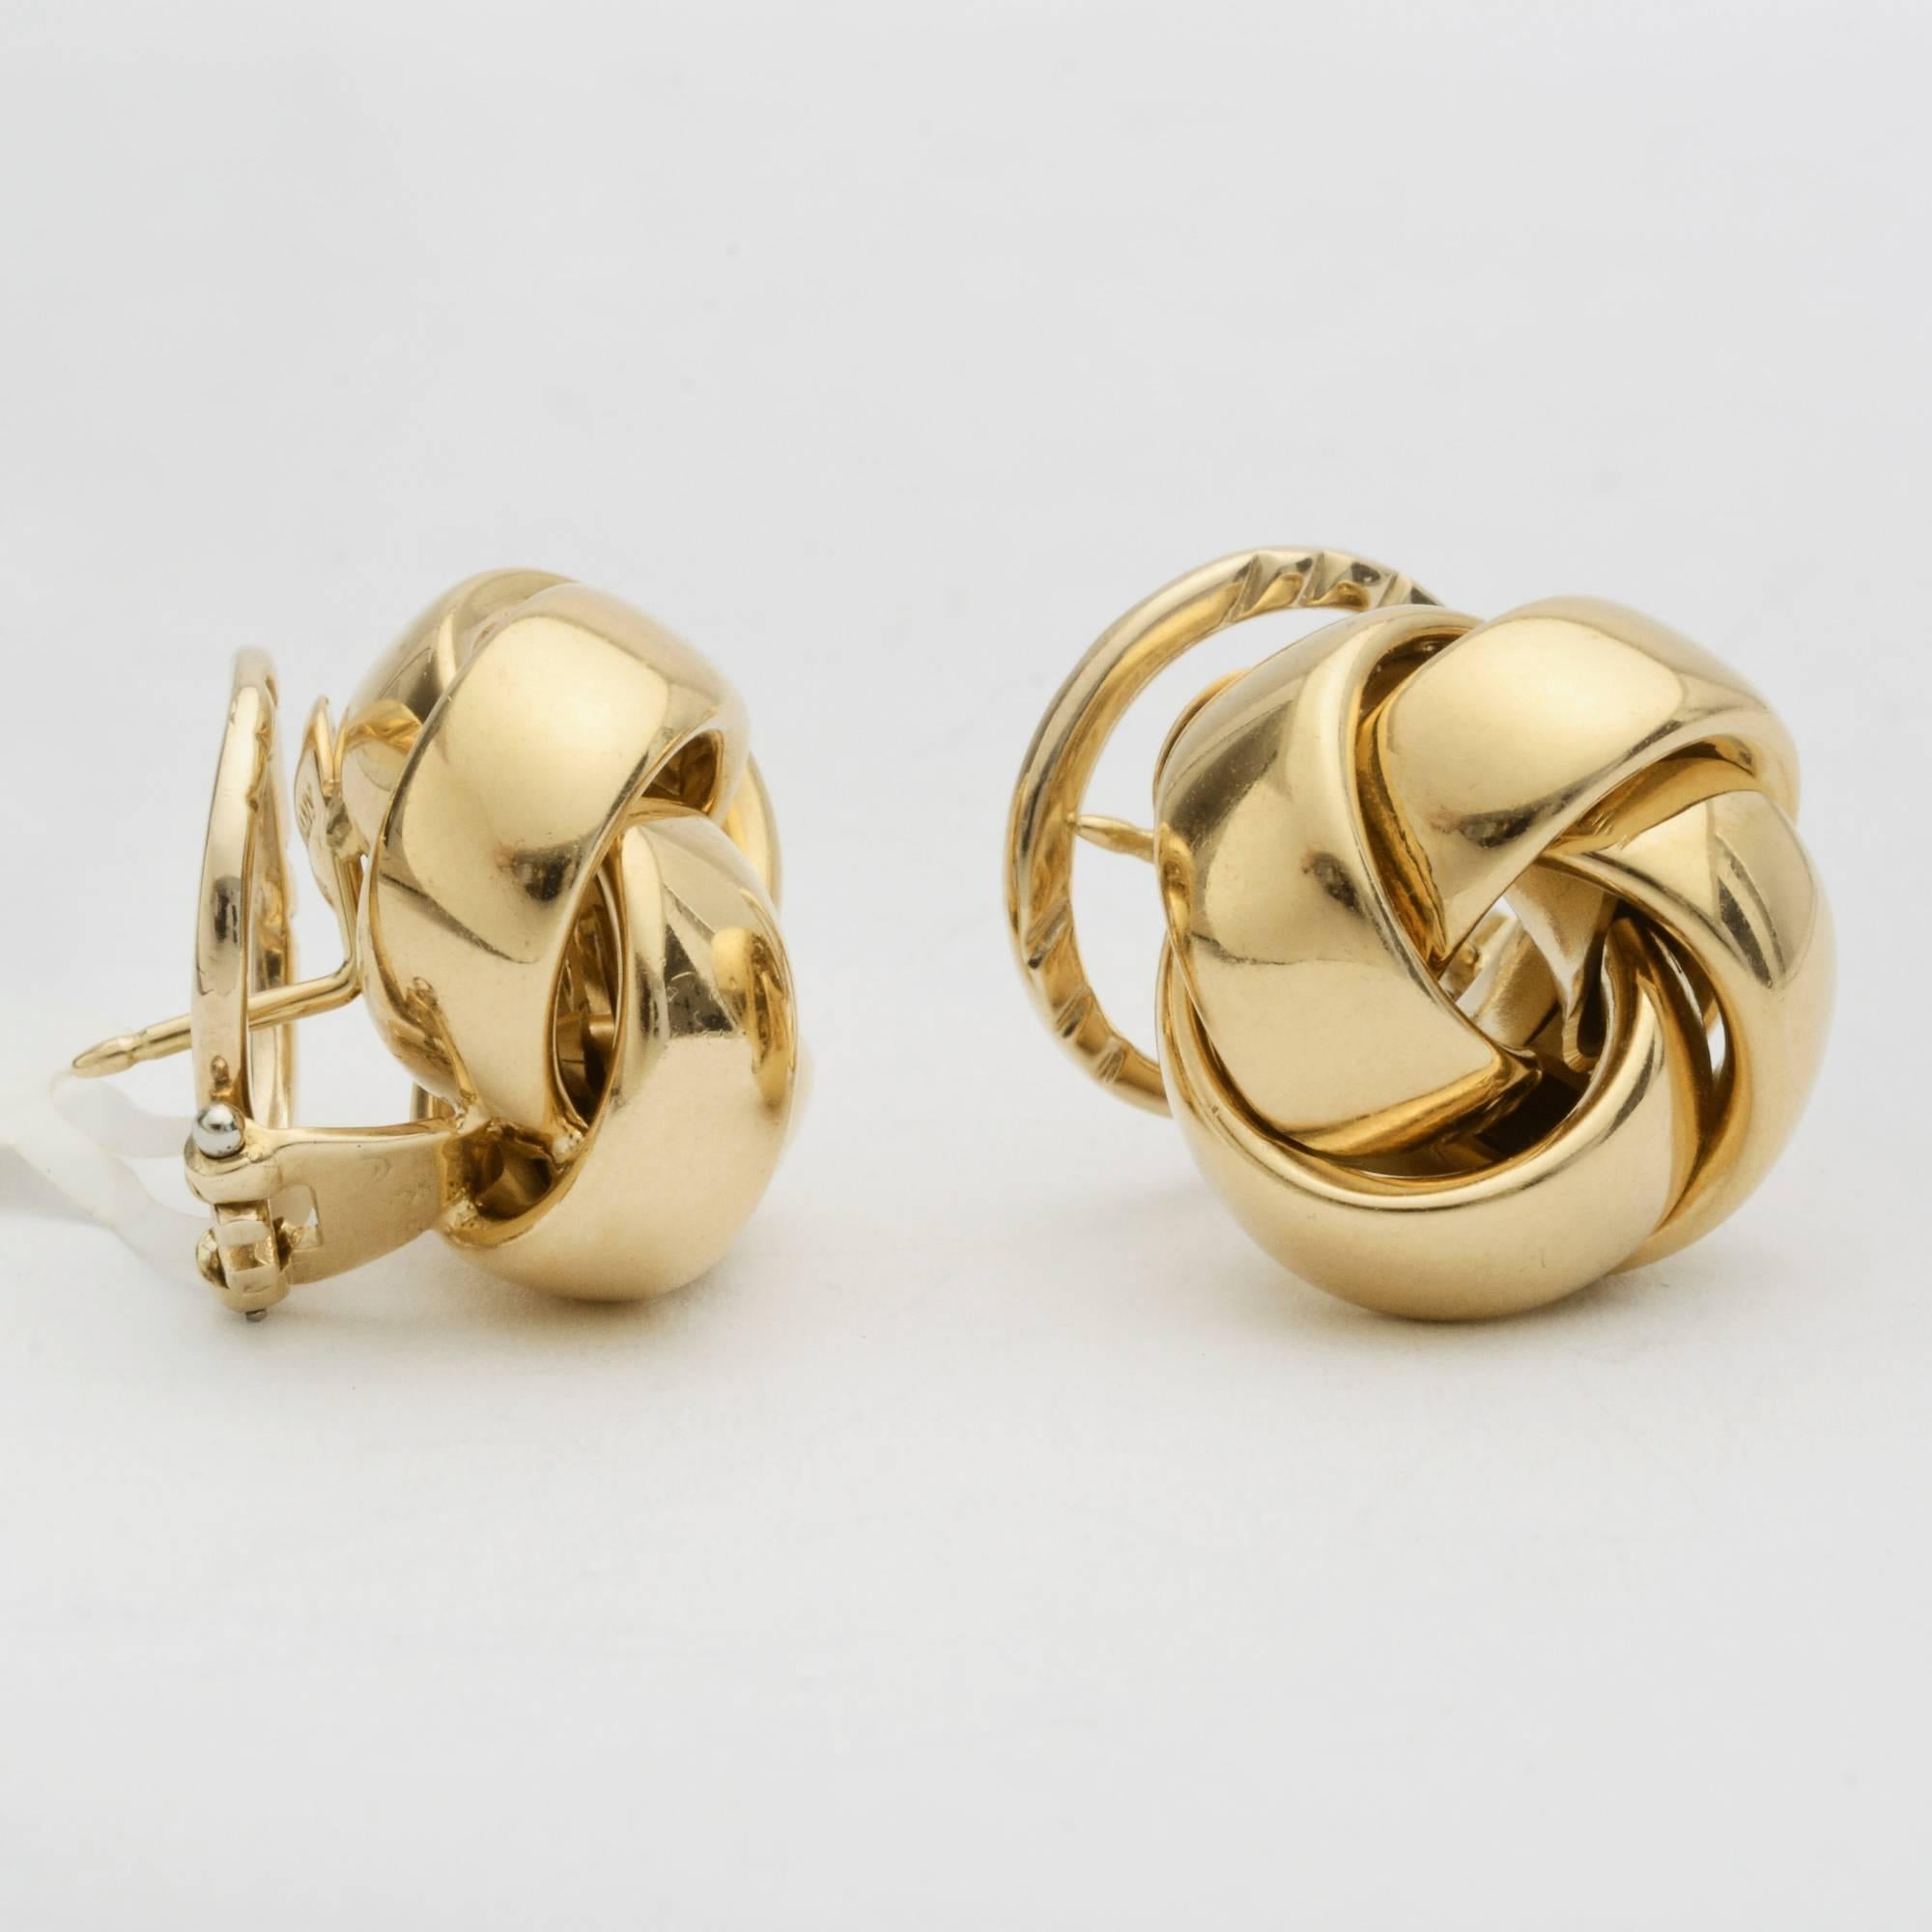 Large pinwheel knot earclips, in polished 18k yellow gold, made in Germany, stamped 'AZ' for Abel Zimmerman. Clip backs with posts (posts may be removed so can be worn simply with clips). 0.74